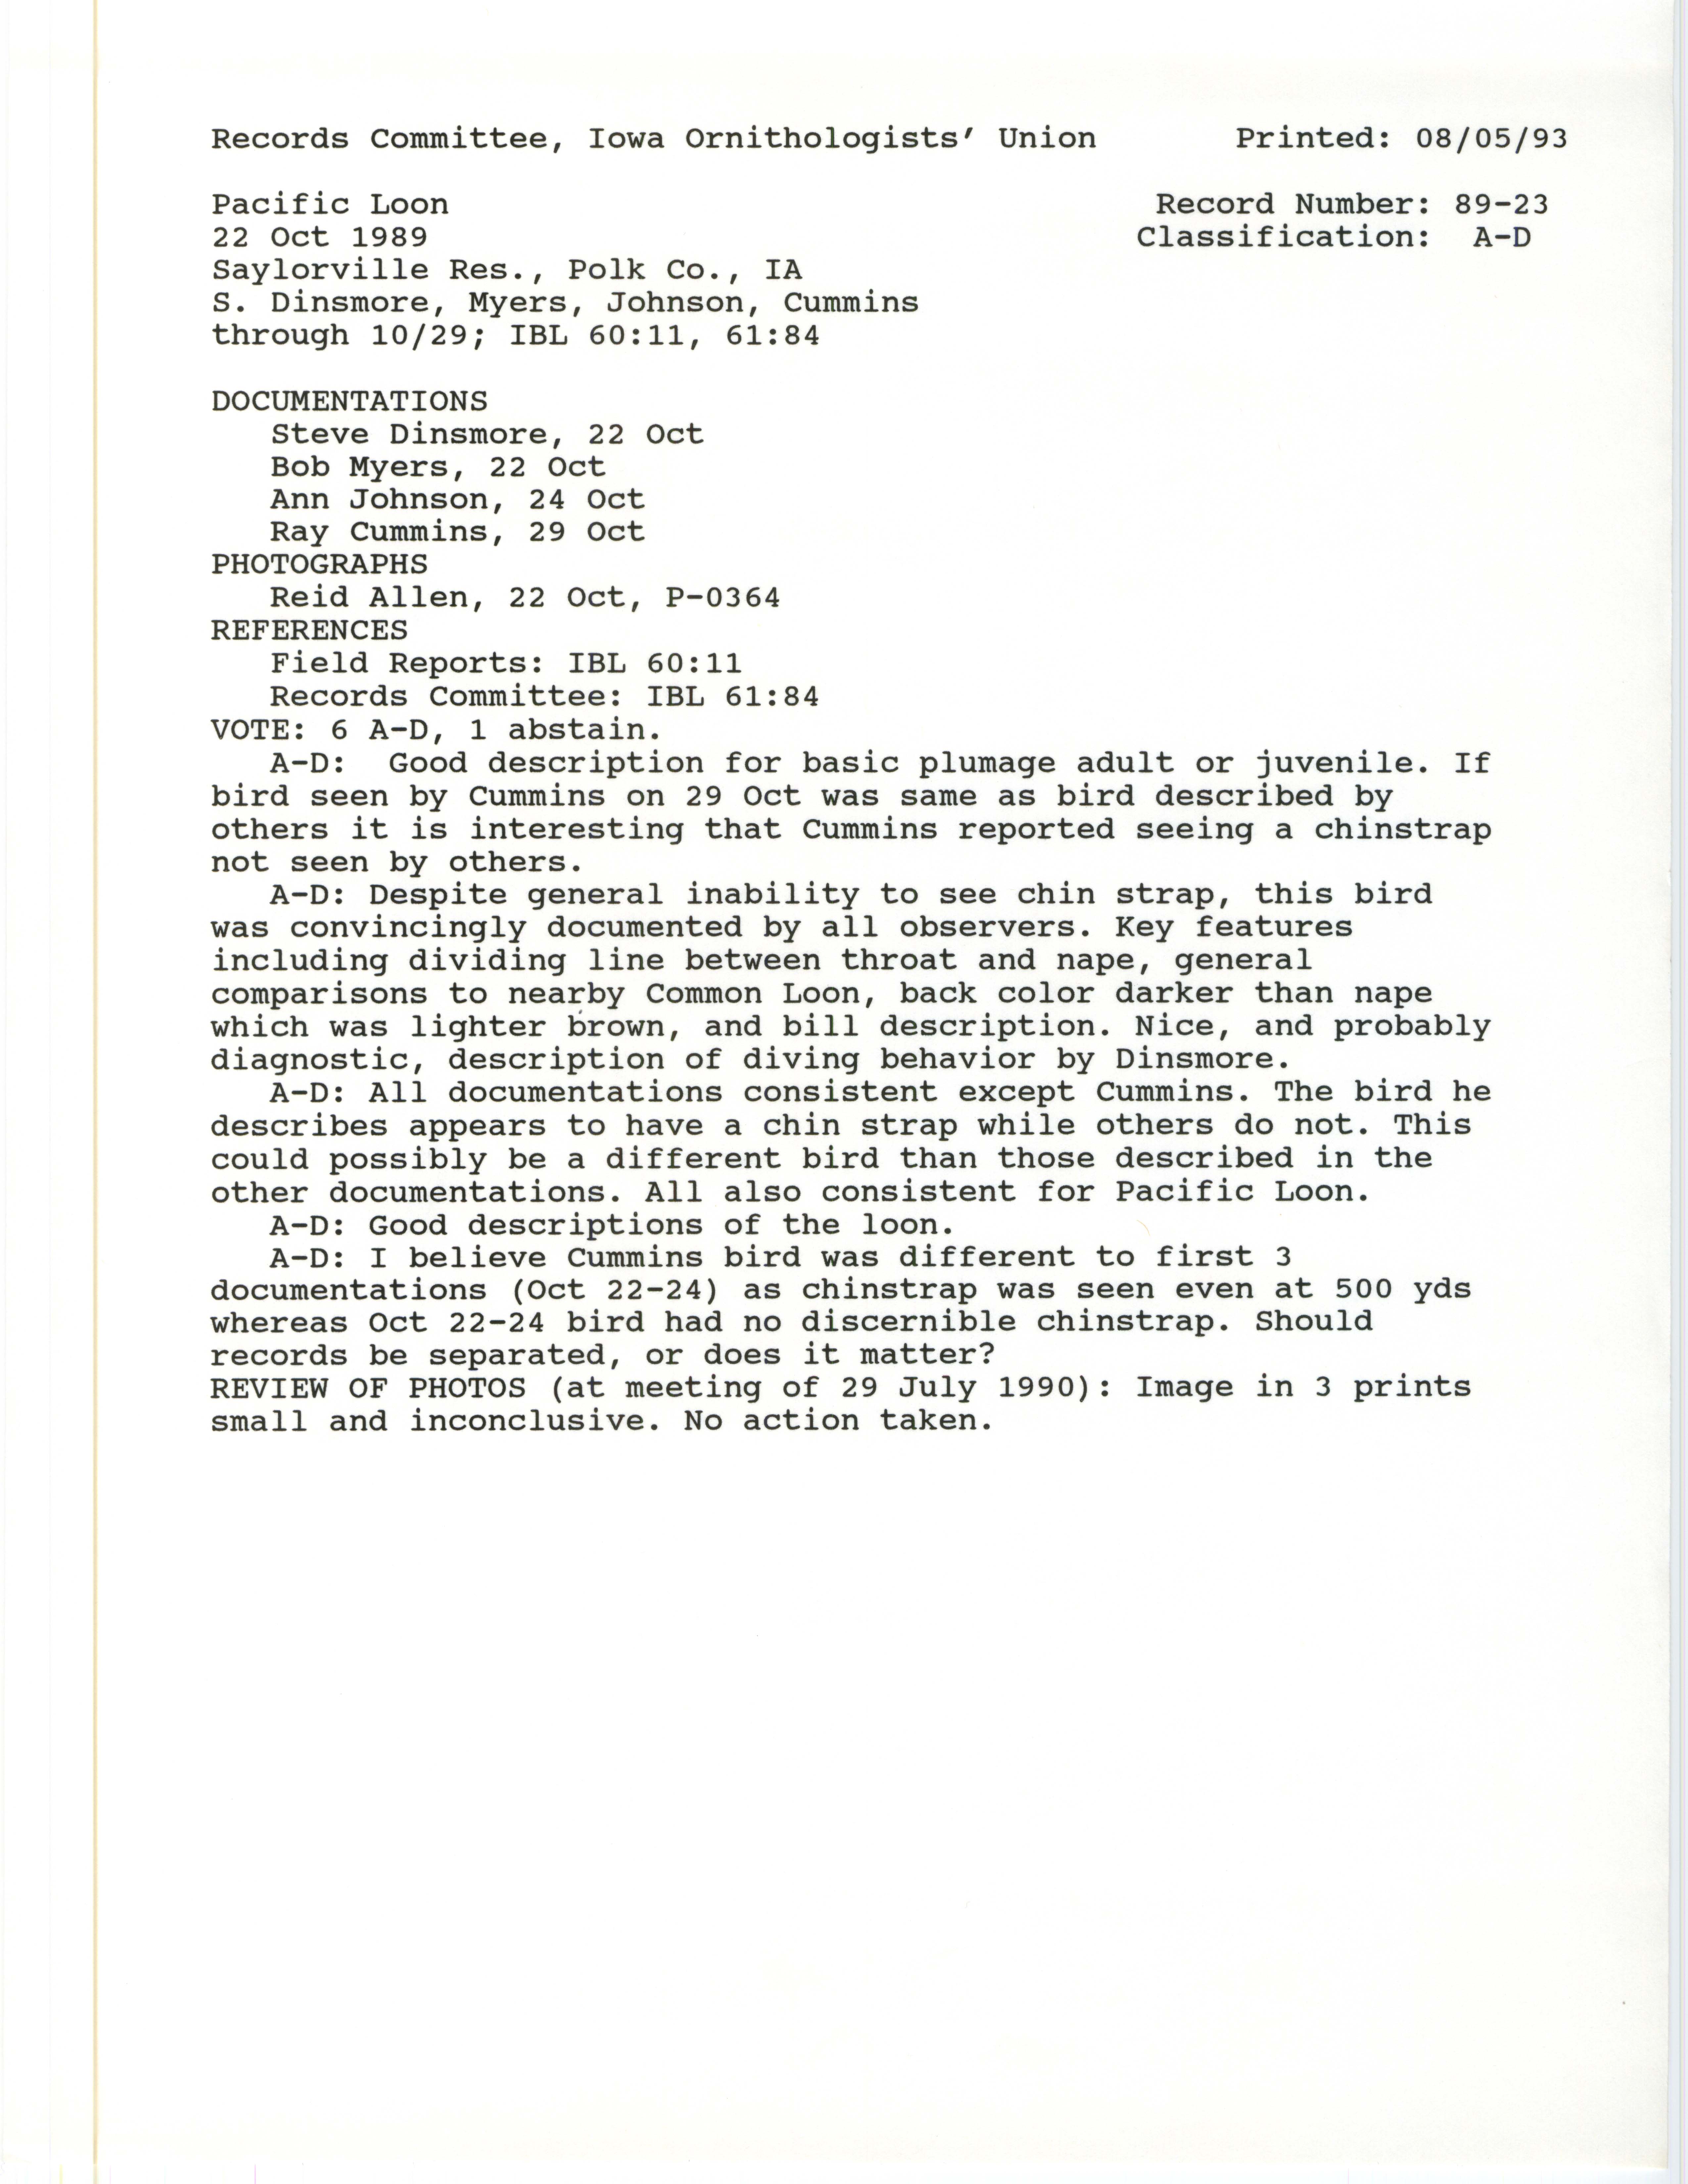 Records Committee review for rare bird sighting of Pacific Loon at Saylorville Reservoir, 1989